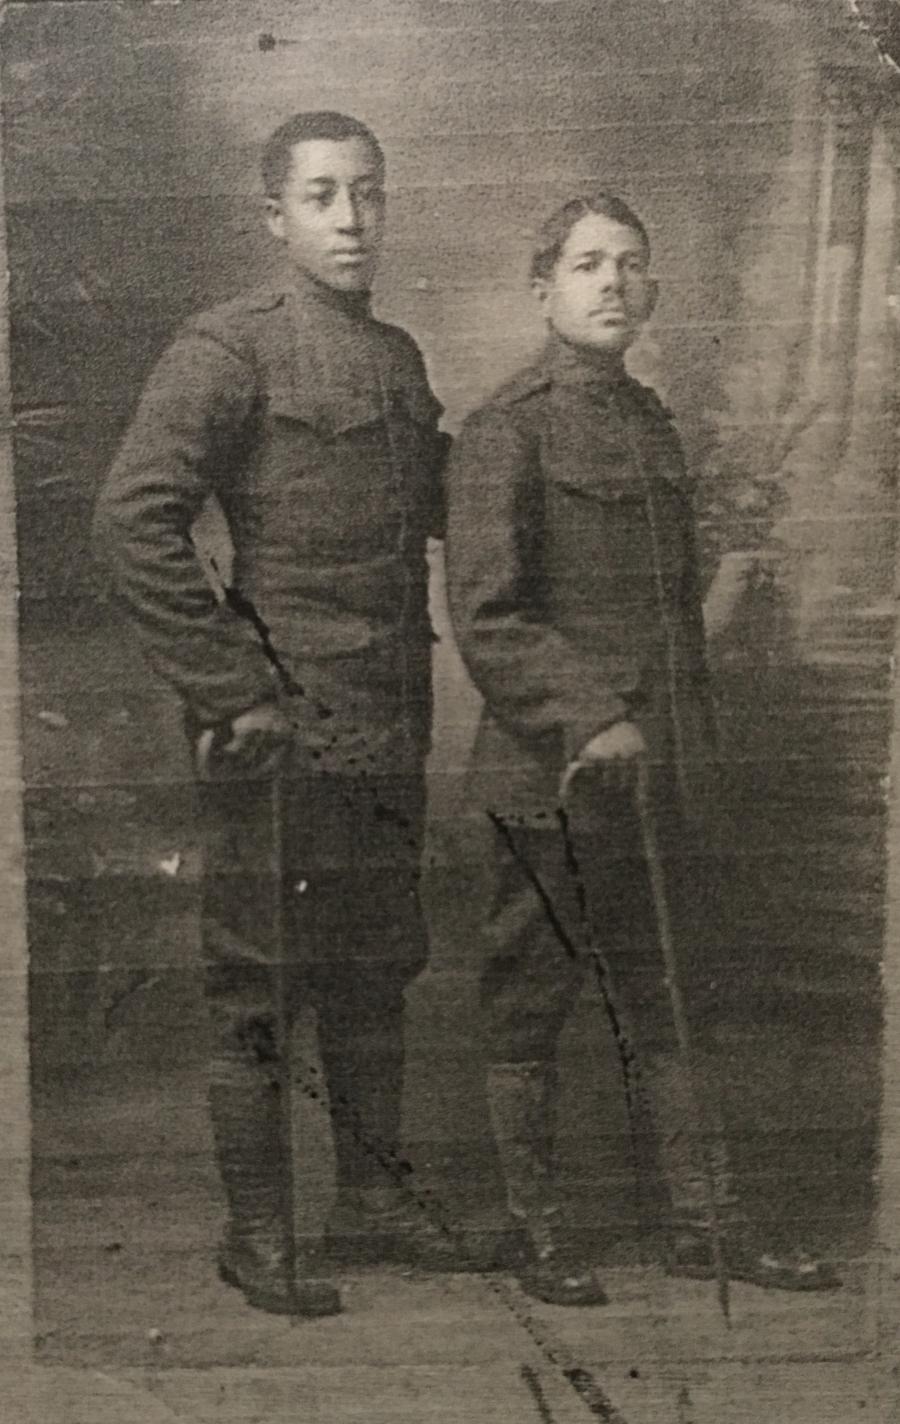 Cpl. Jesse Moore, right, was among the 13 soldiers hanged.